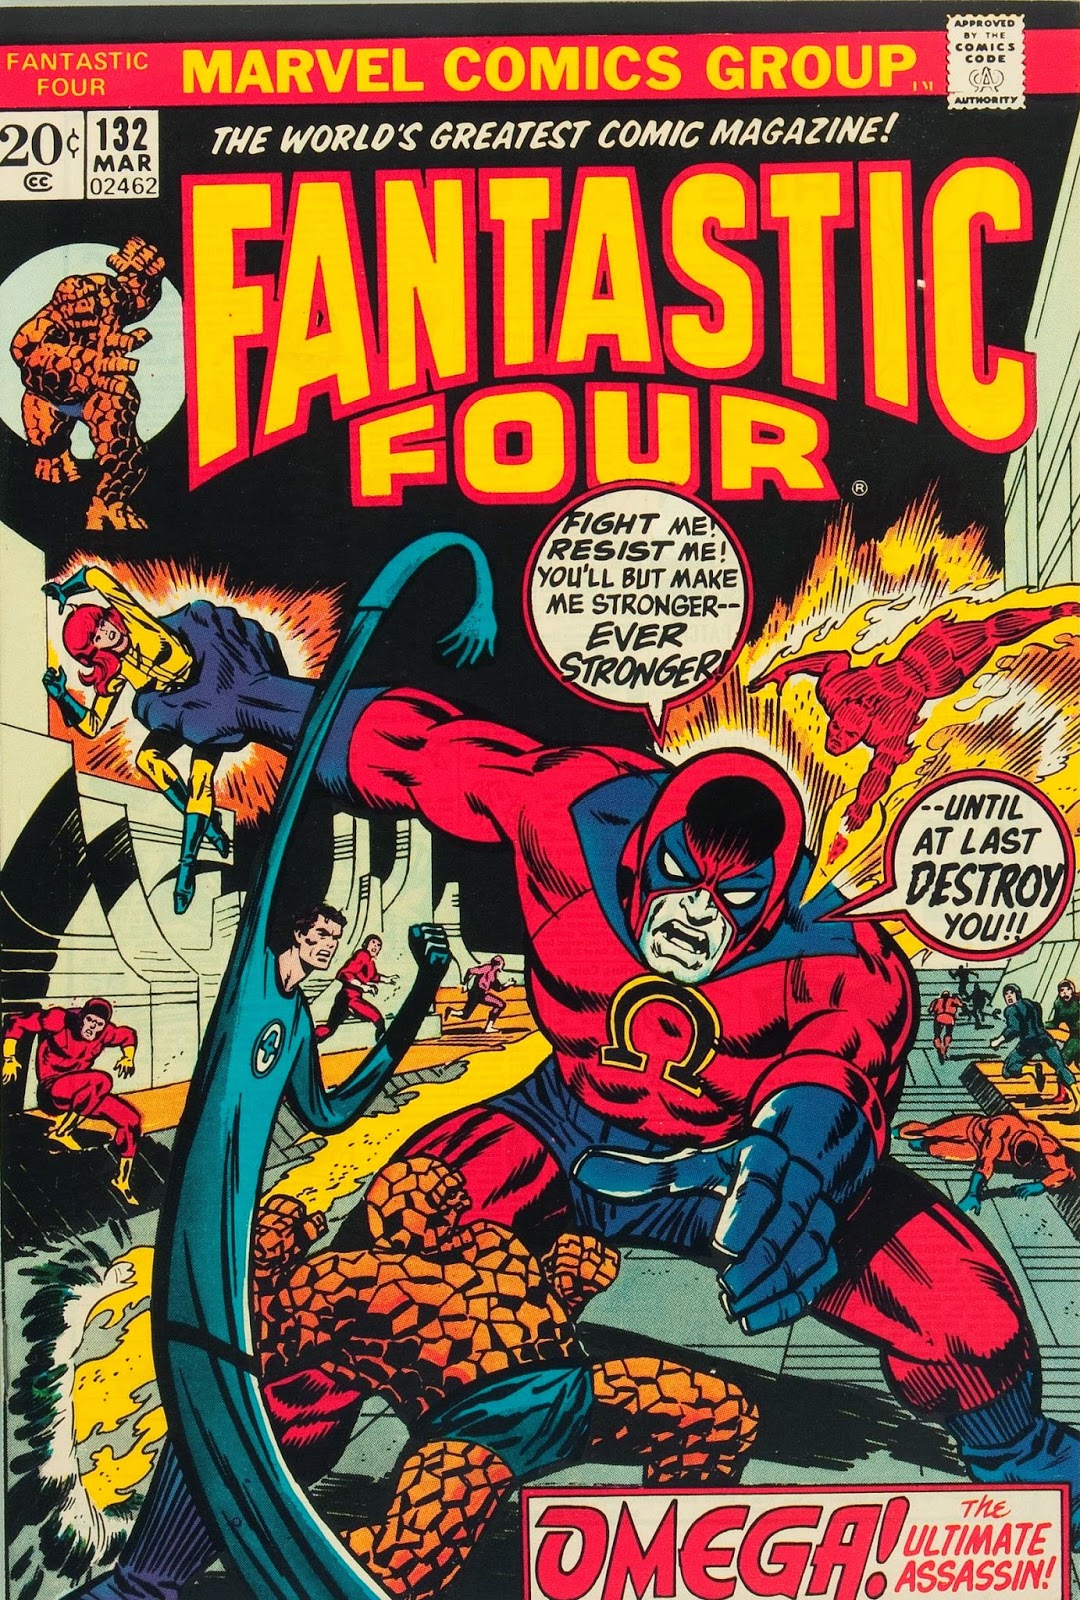 Cap N S Comics The Fantastic Four By Jim Steranko And